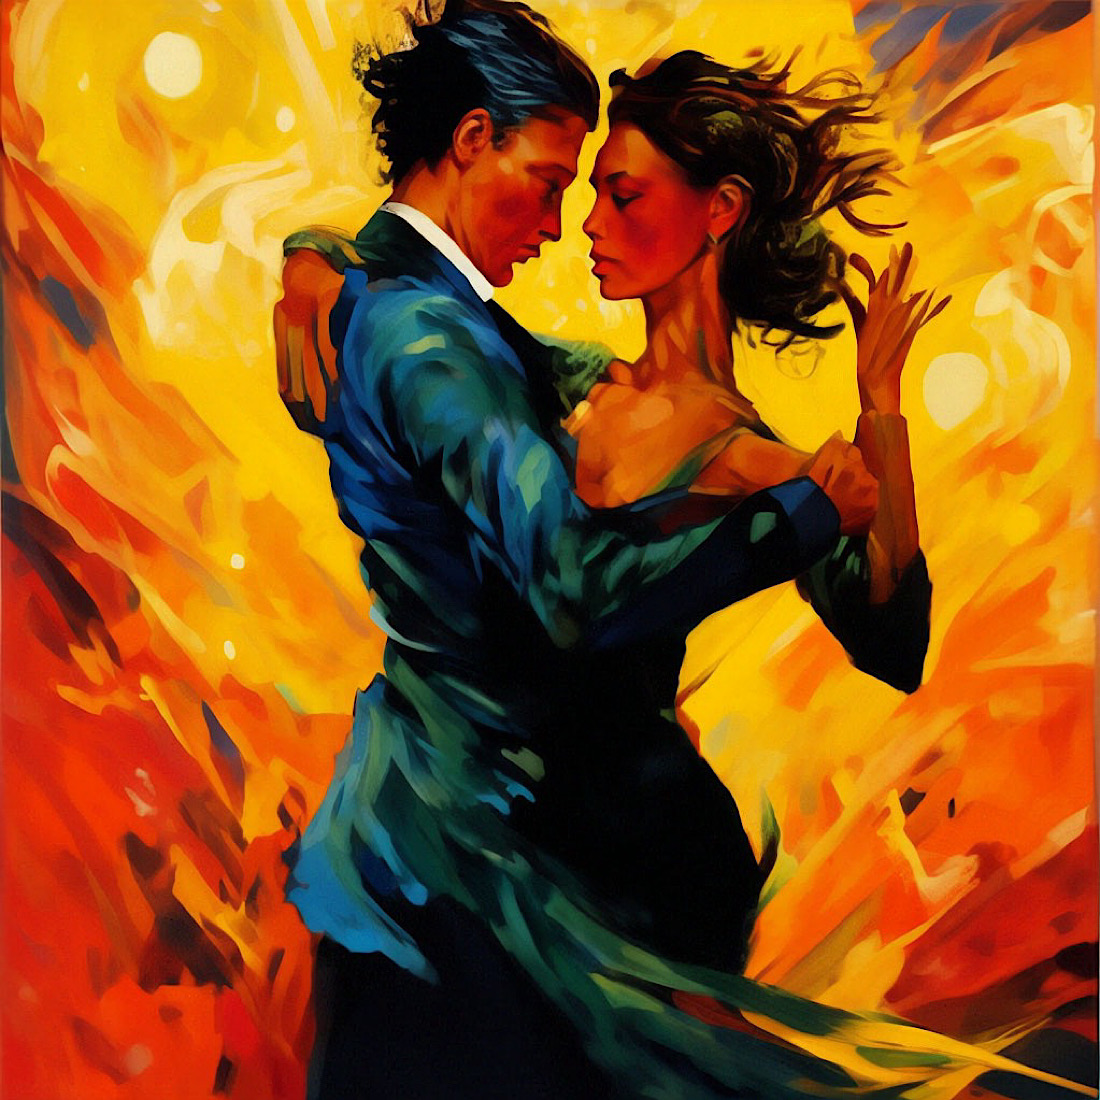 Oil painting "Tango" in Van Gogh style preview image.